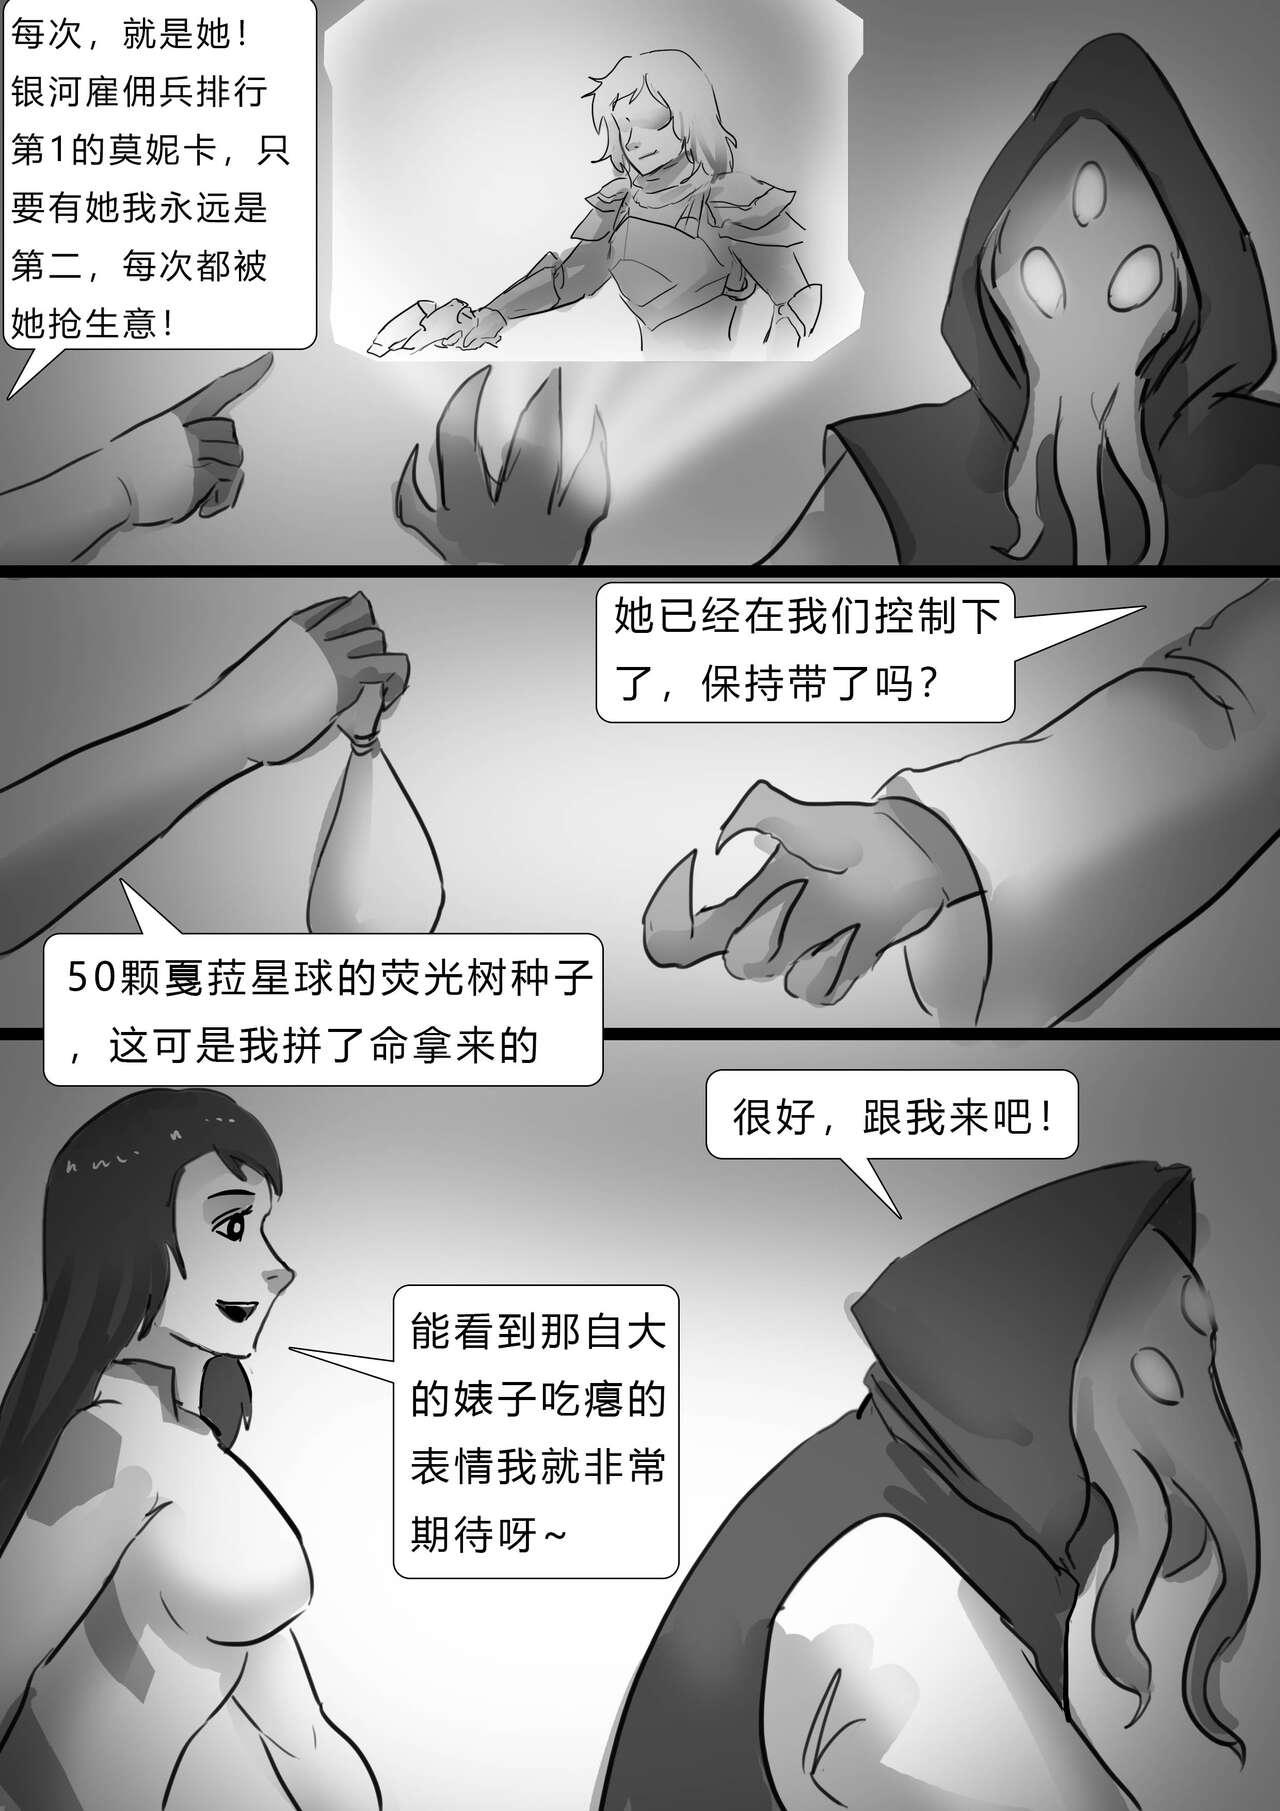 Old And Young 千变女奴 Thousand-change slave girl Deutsche - Page 4